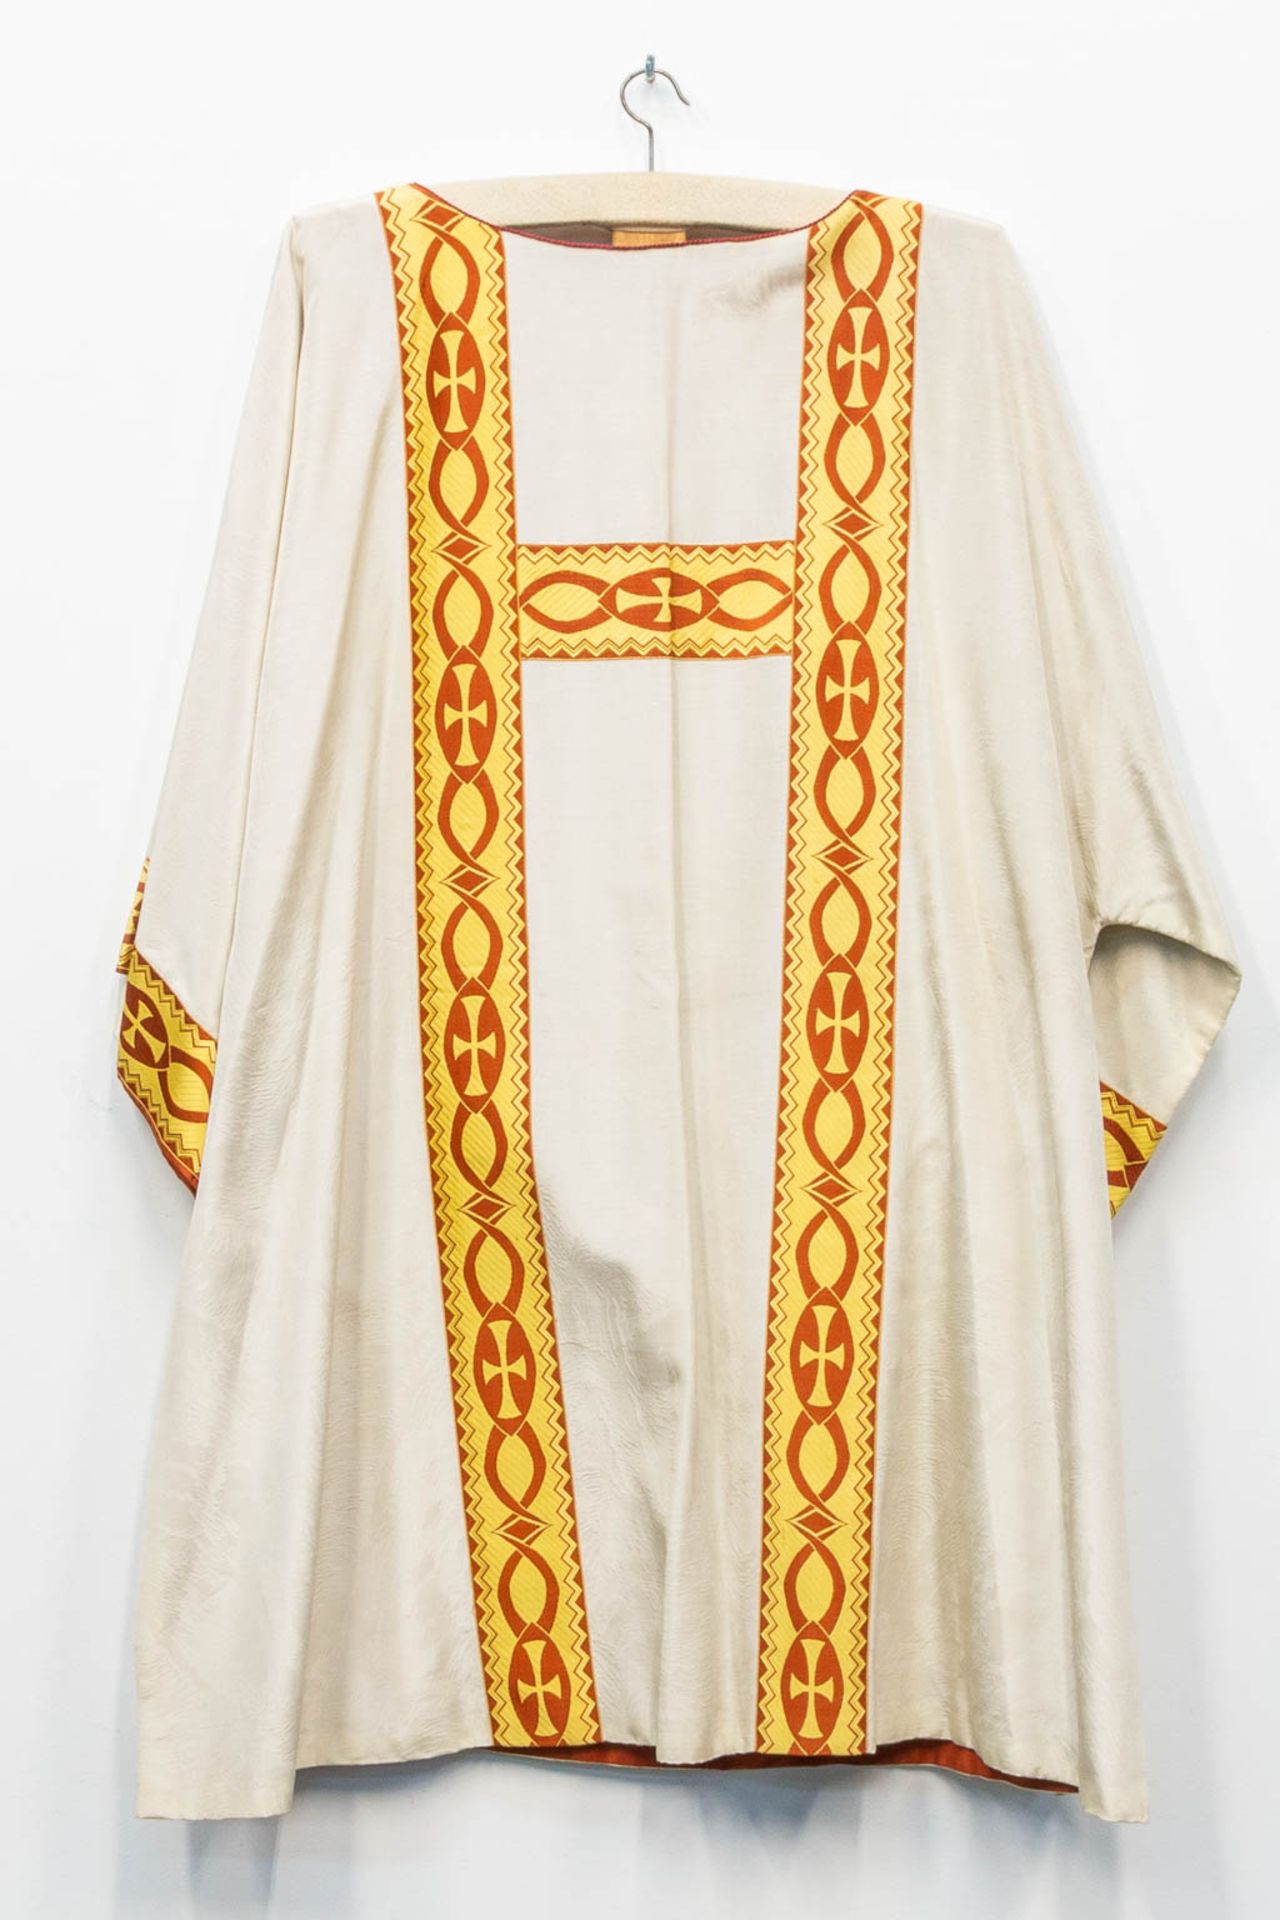 A collection of 4 vintage chasubles, 20th C. - Image 10 of 12